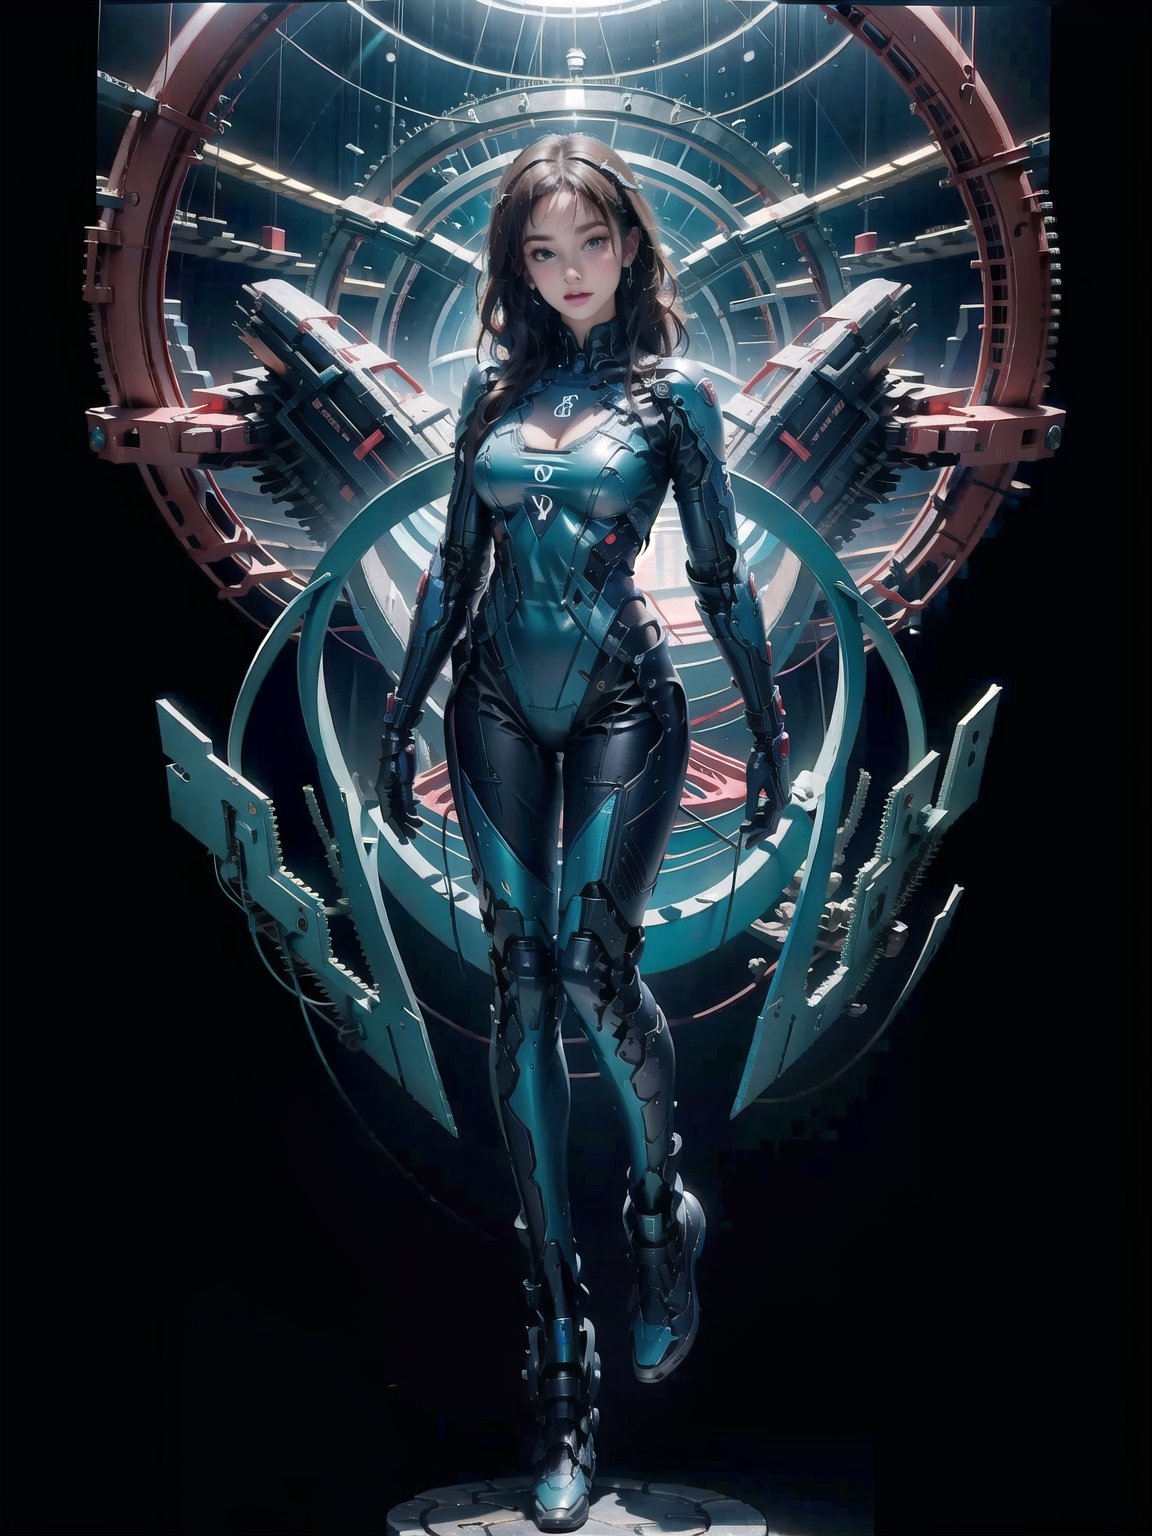 masterpiece, high details, optimal quality, 8k, extreme resolution, 1 girl, beautiful face, delicate and subtle makeup, with brown eyes, very well detailed and real, red curly hair, somewhat disheveled, perfect body, well defined, big chest , dressed in futuristic aqua green shiny vinyl suit, impeccable finger details, full body view, looking at the viewer, with a background of a futuristic city in space.